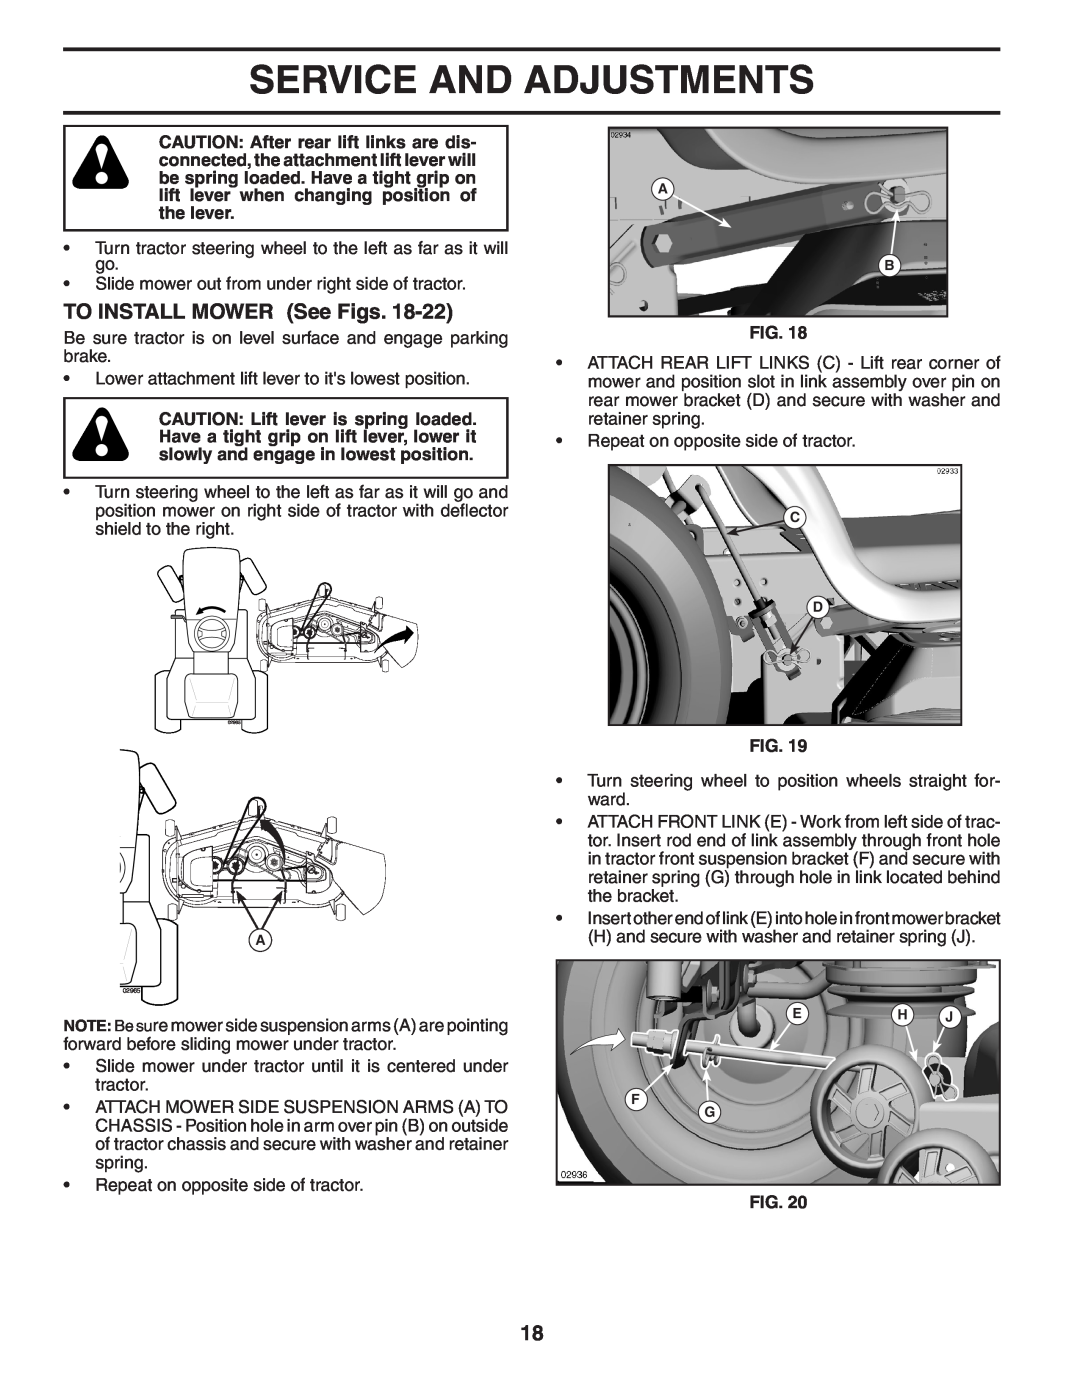 Poulan 404489 manual TO INSTALL MOWER See Figs, Service And Adjustments 